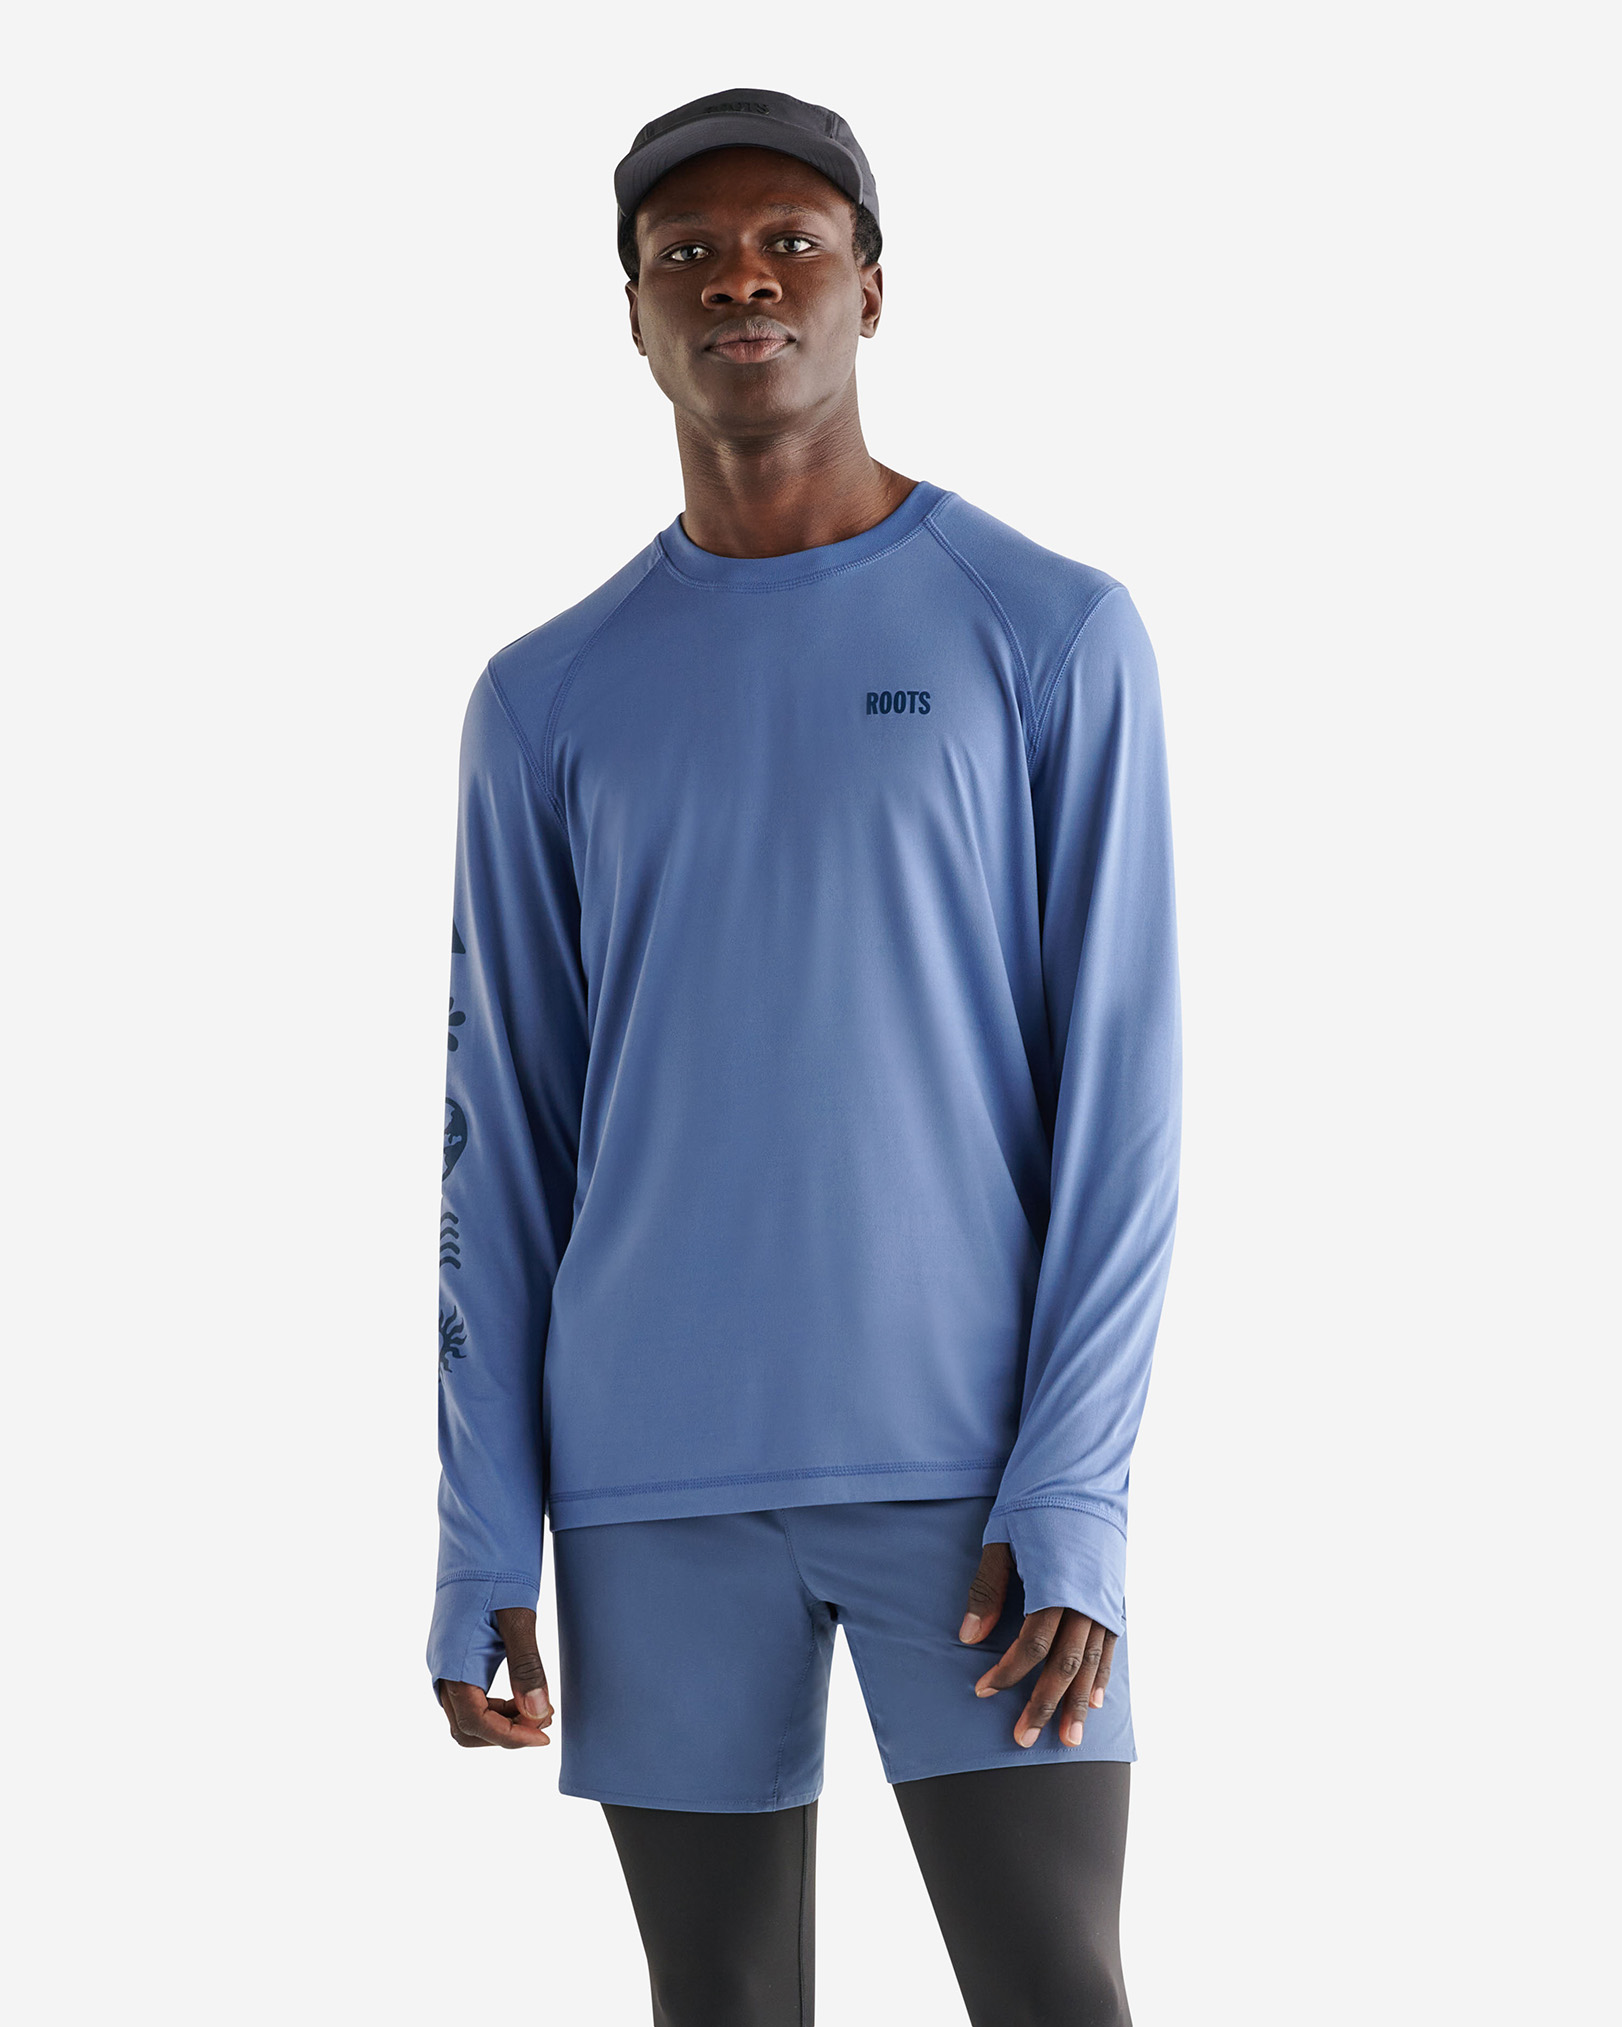 Roots Renew Graphic Long Sleeve T-Shirt in Blue Horizon